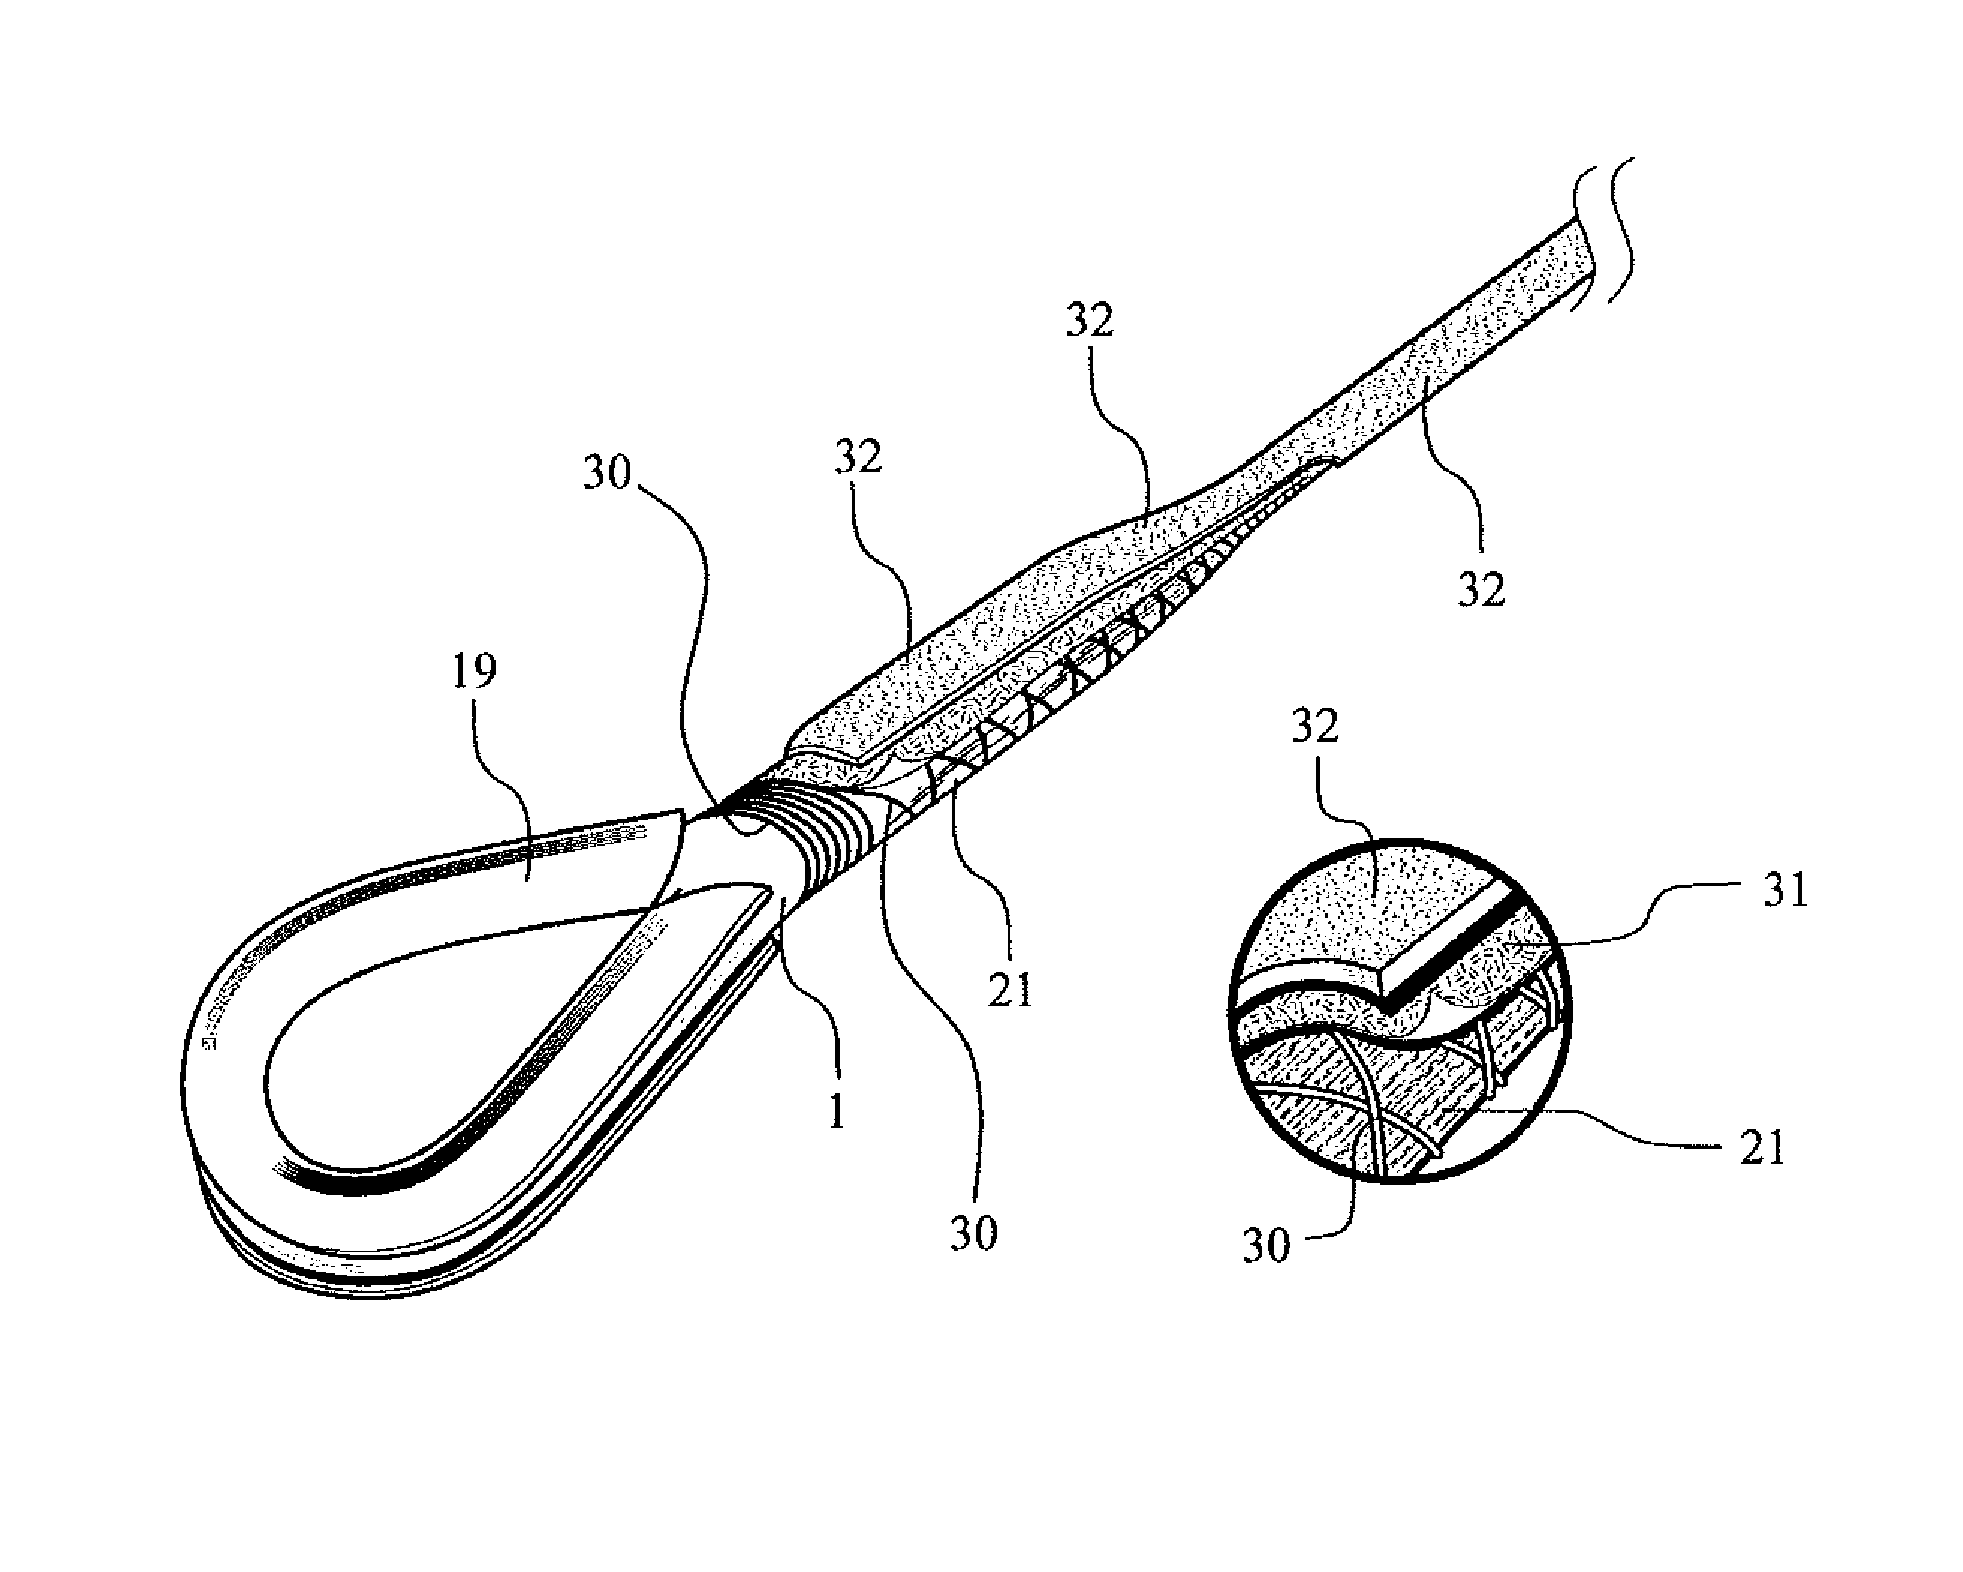 Cable and method for manufacturing a synthetic cable